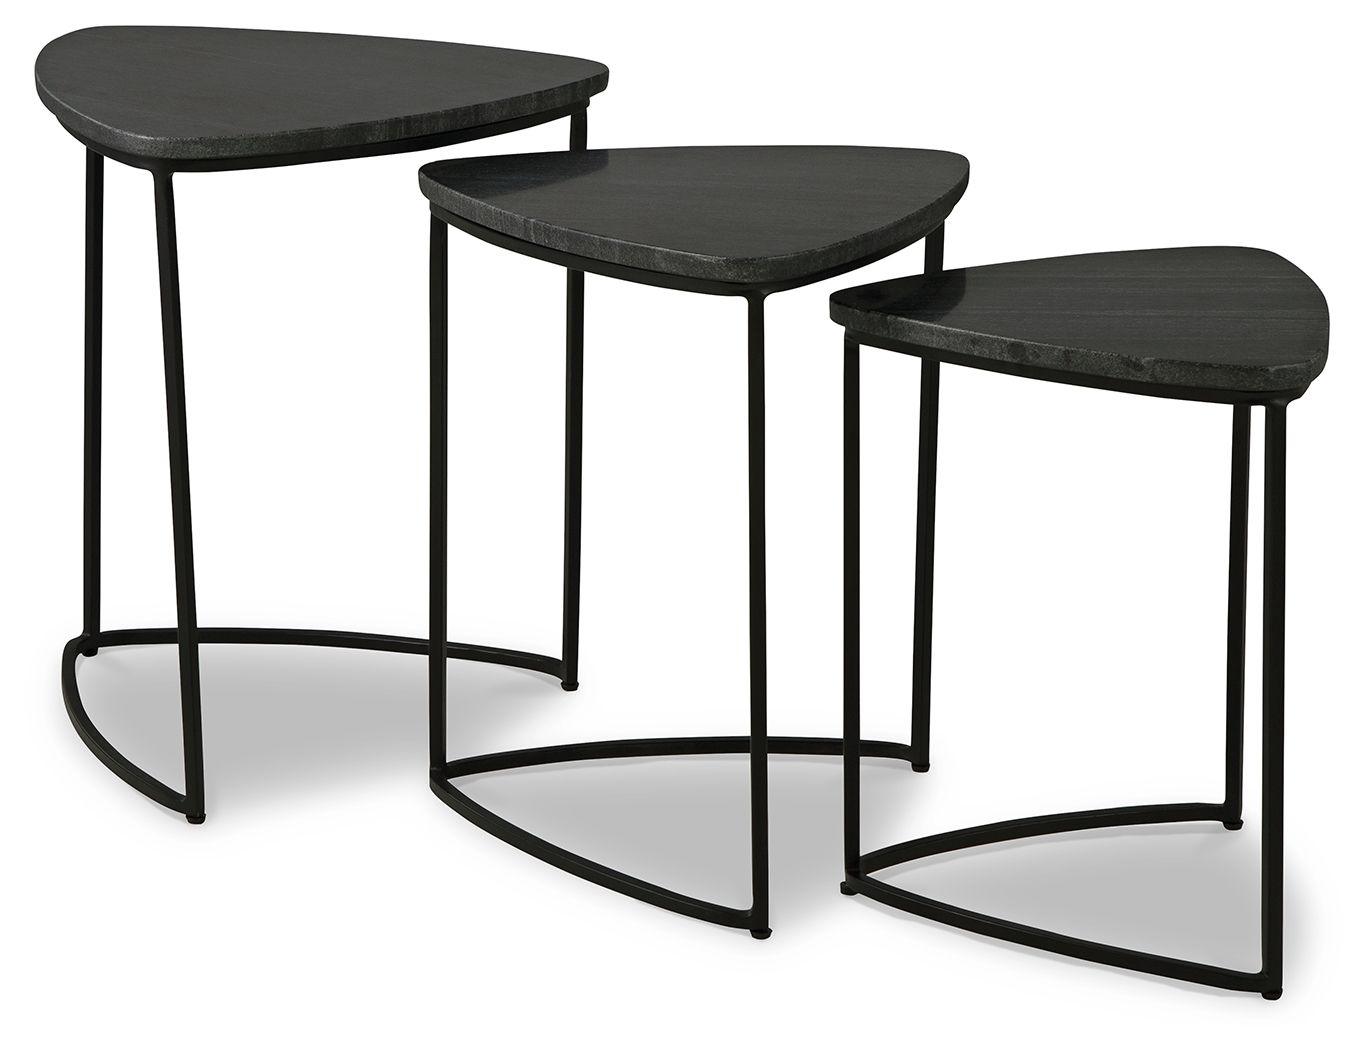 Signature Design by Ashley® - Olinmere - Black - Accent Table (Set of 3) - 5th Avenue Furniture